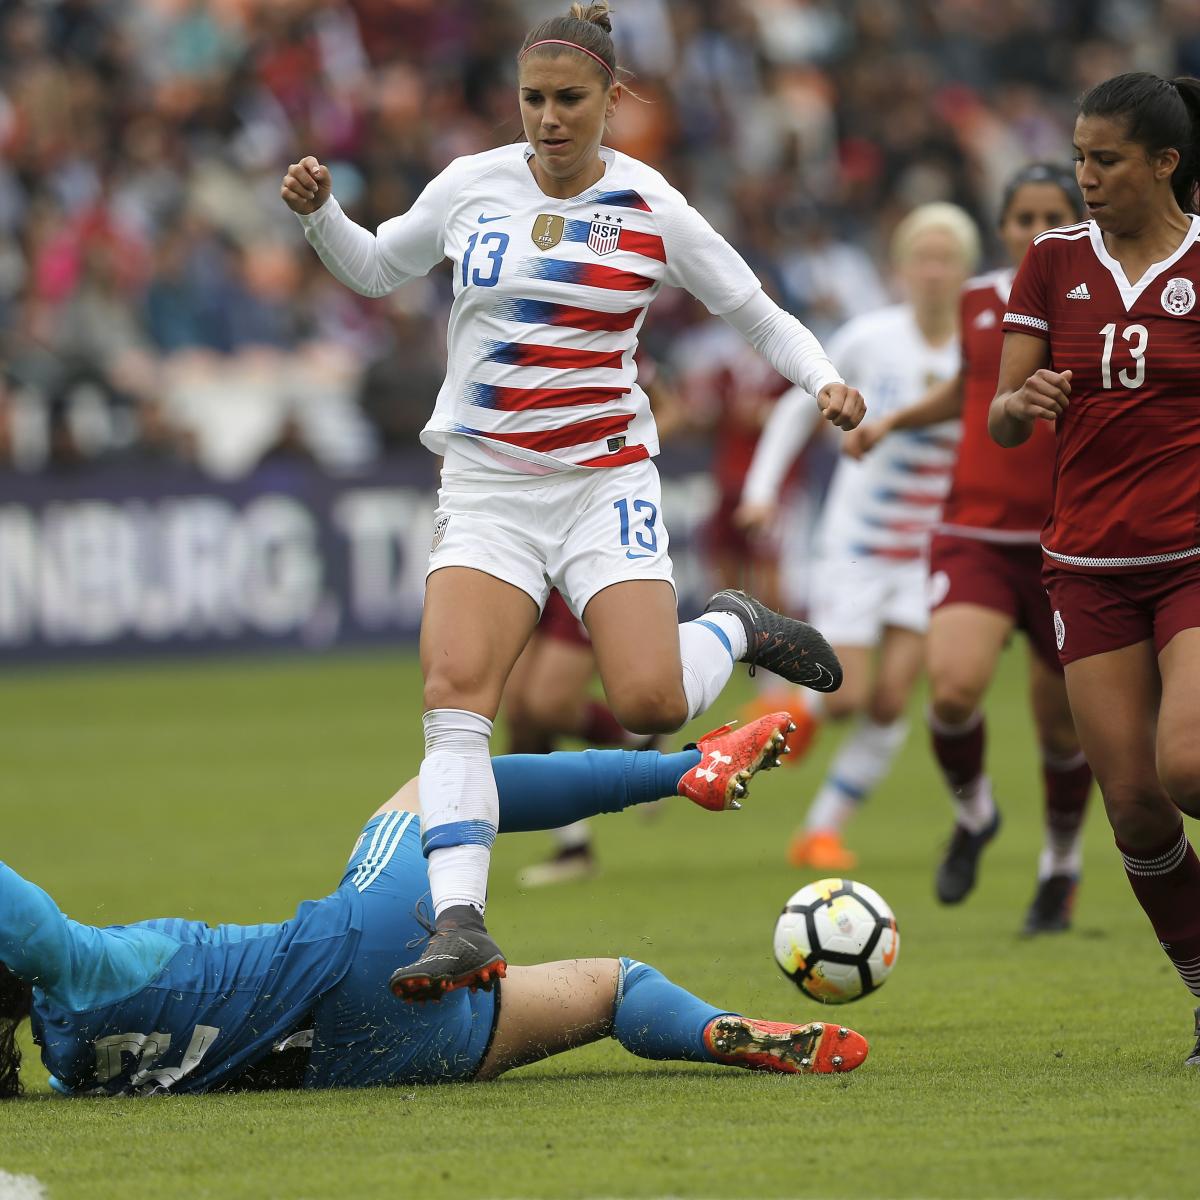 USA vs. Mexico Women's Soccer: Start Time, Live Stream and Predictions